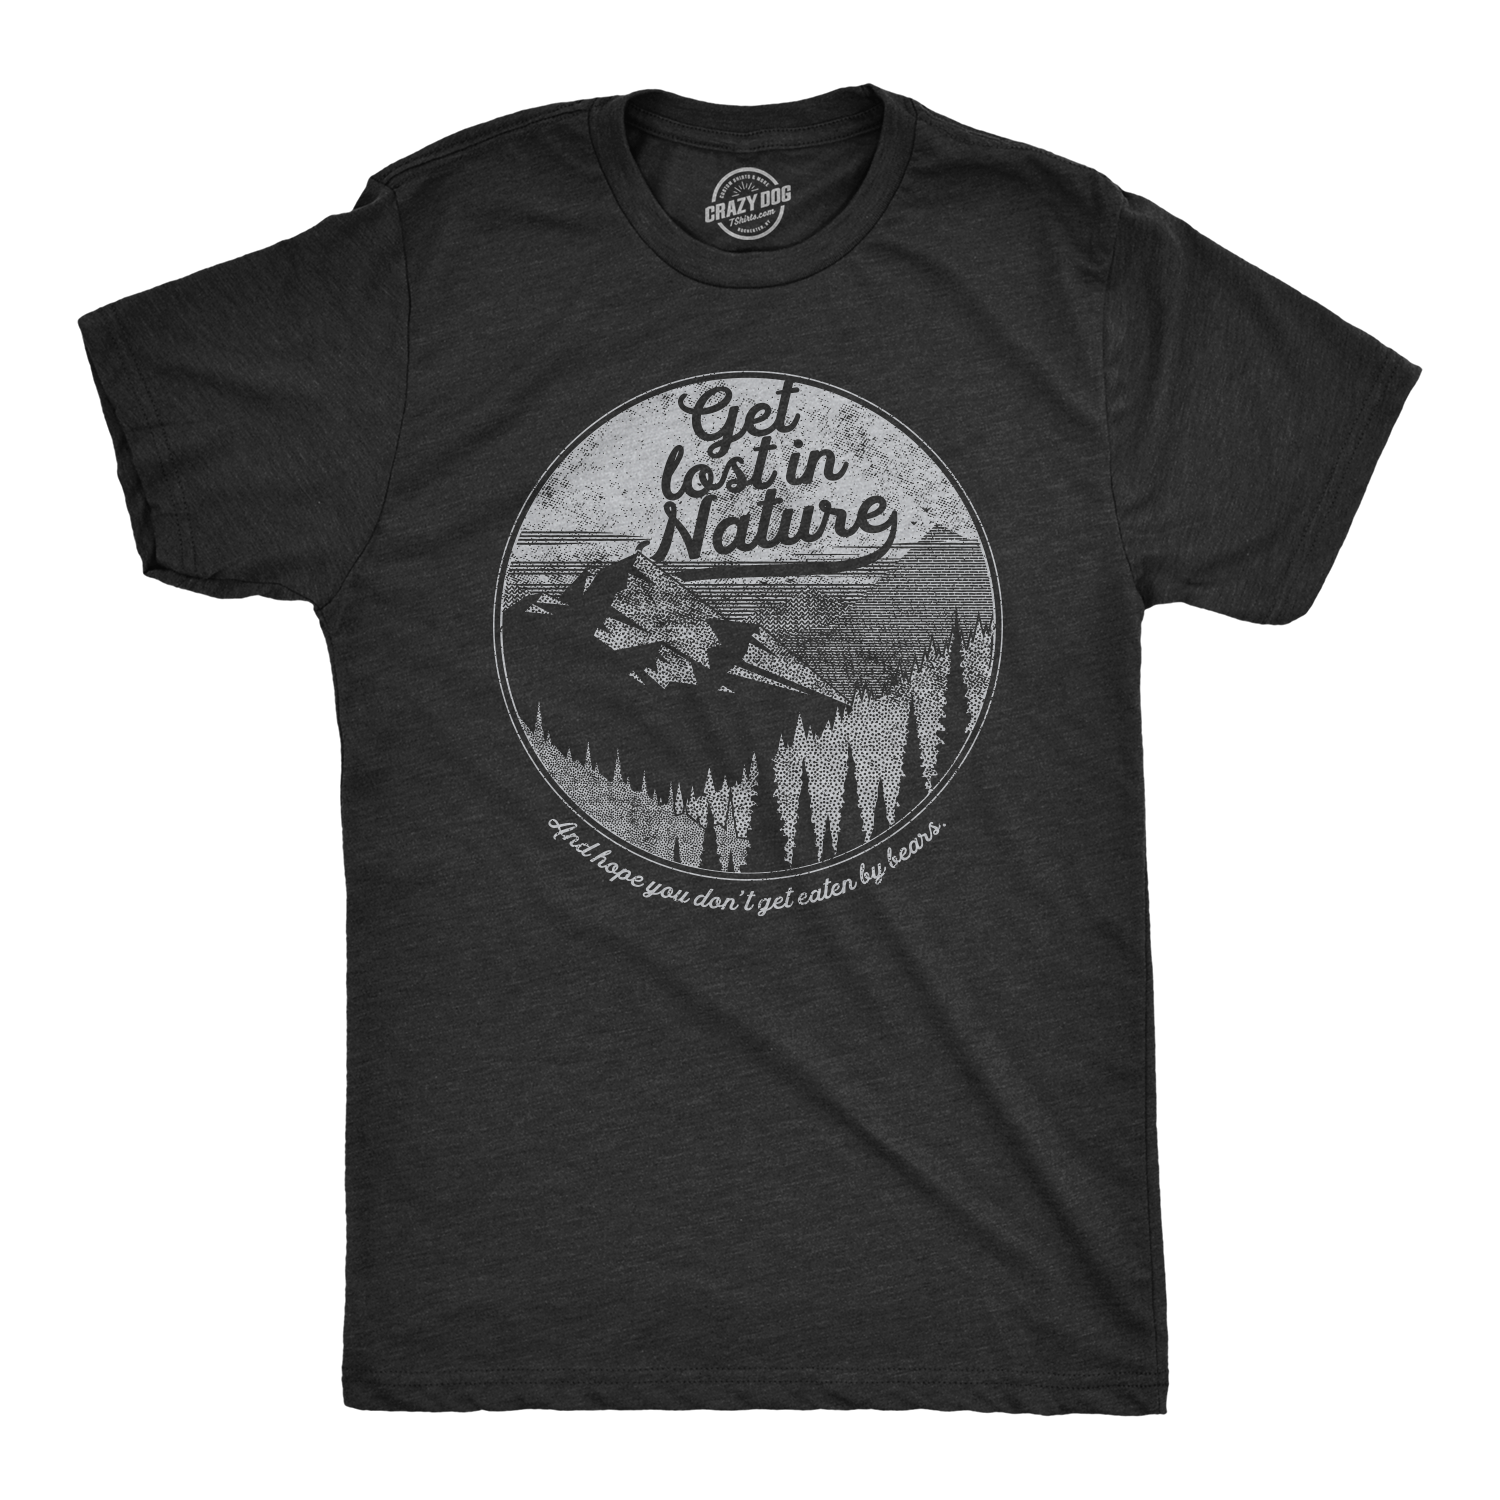 Funny Heather Black - Get Lost Get Lost In Nature Mens T Shirt Nerdy Camping vacation Tee